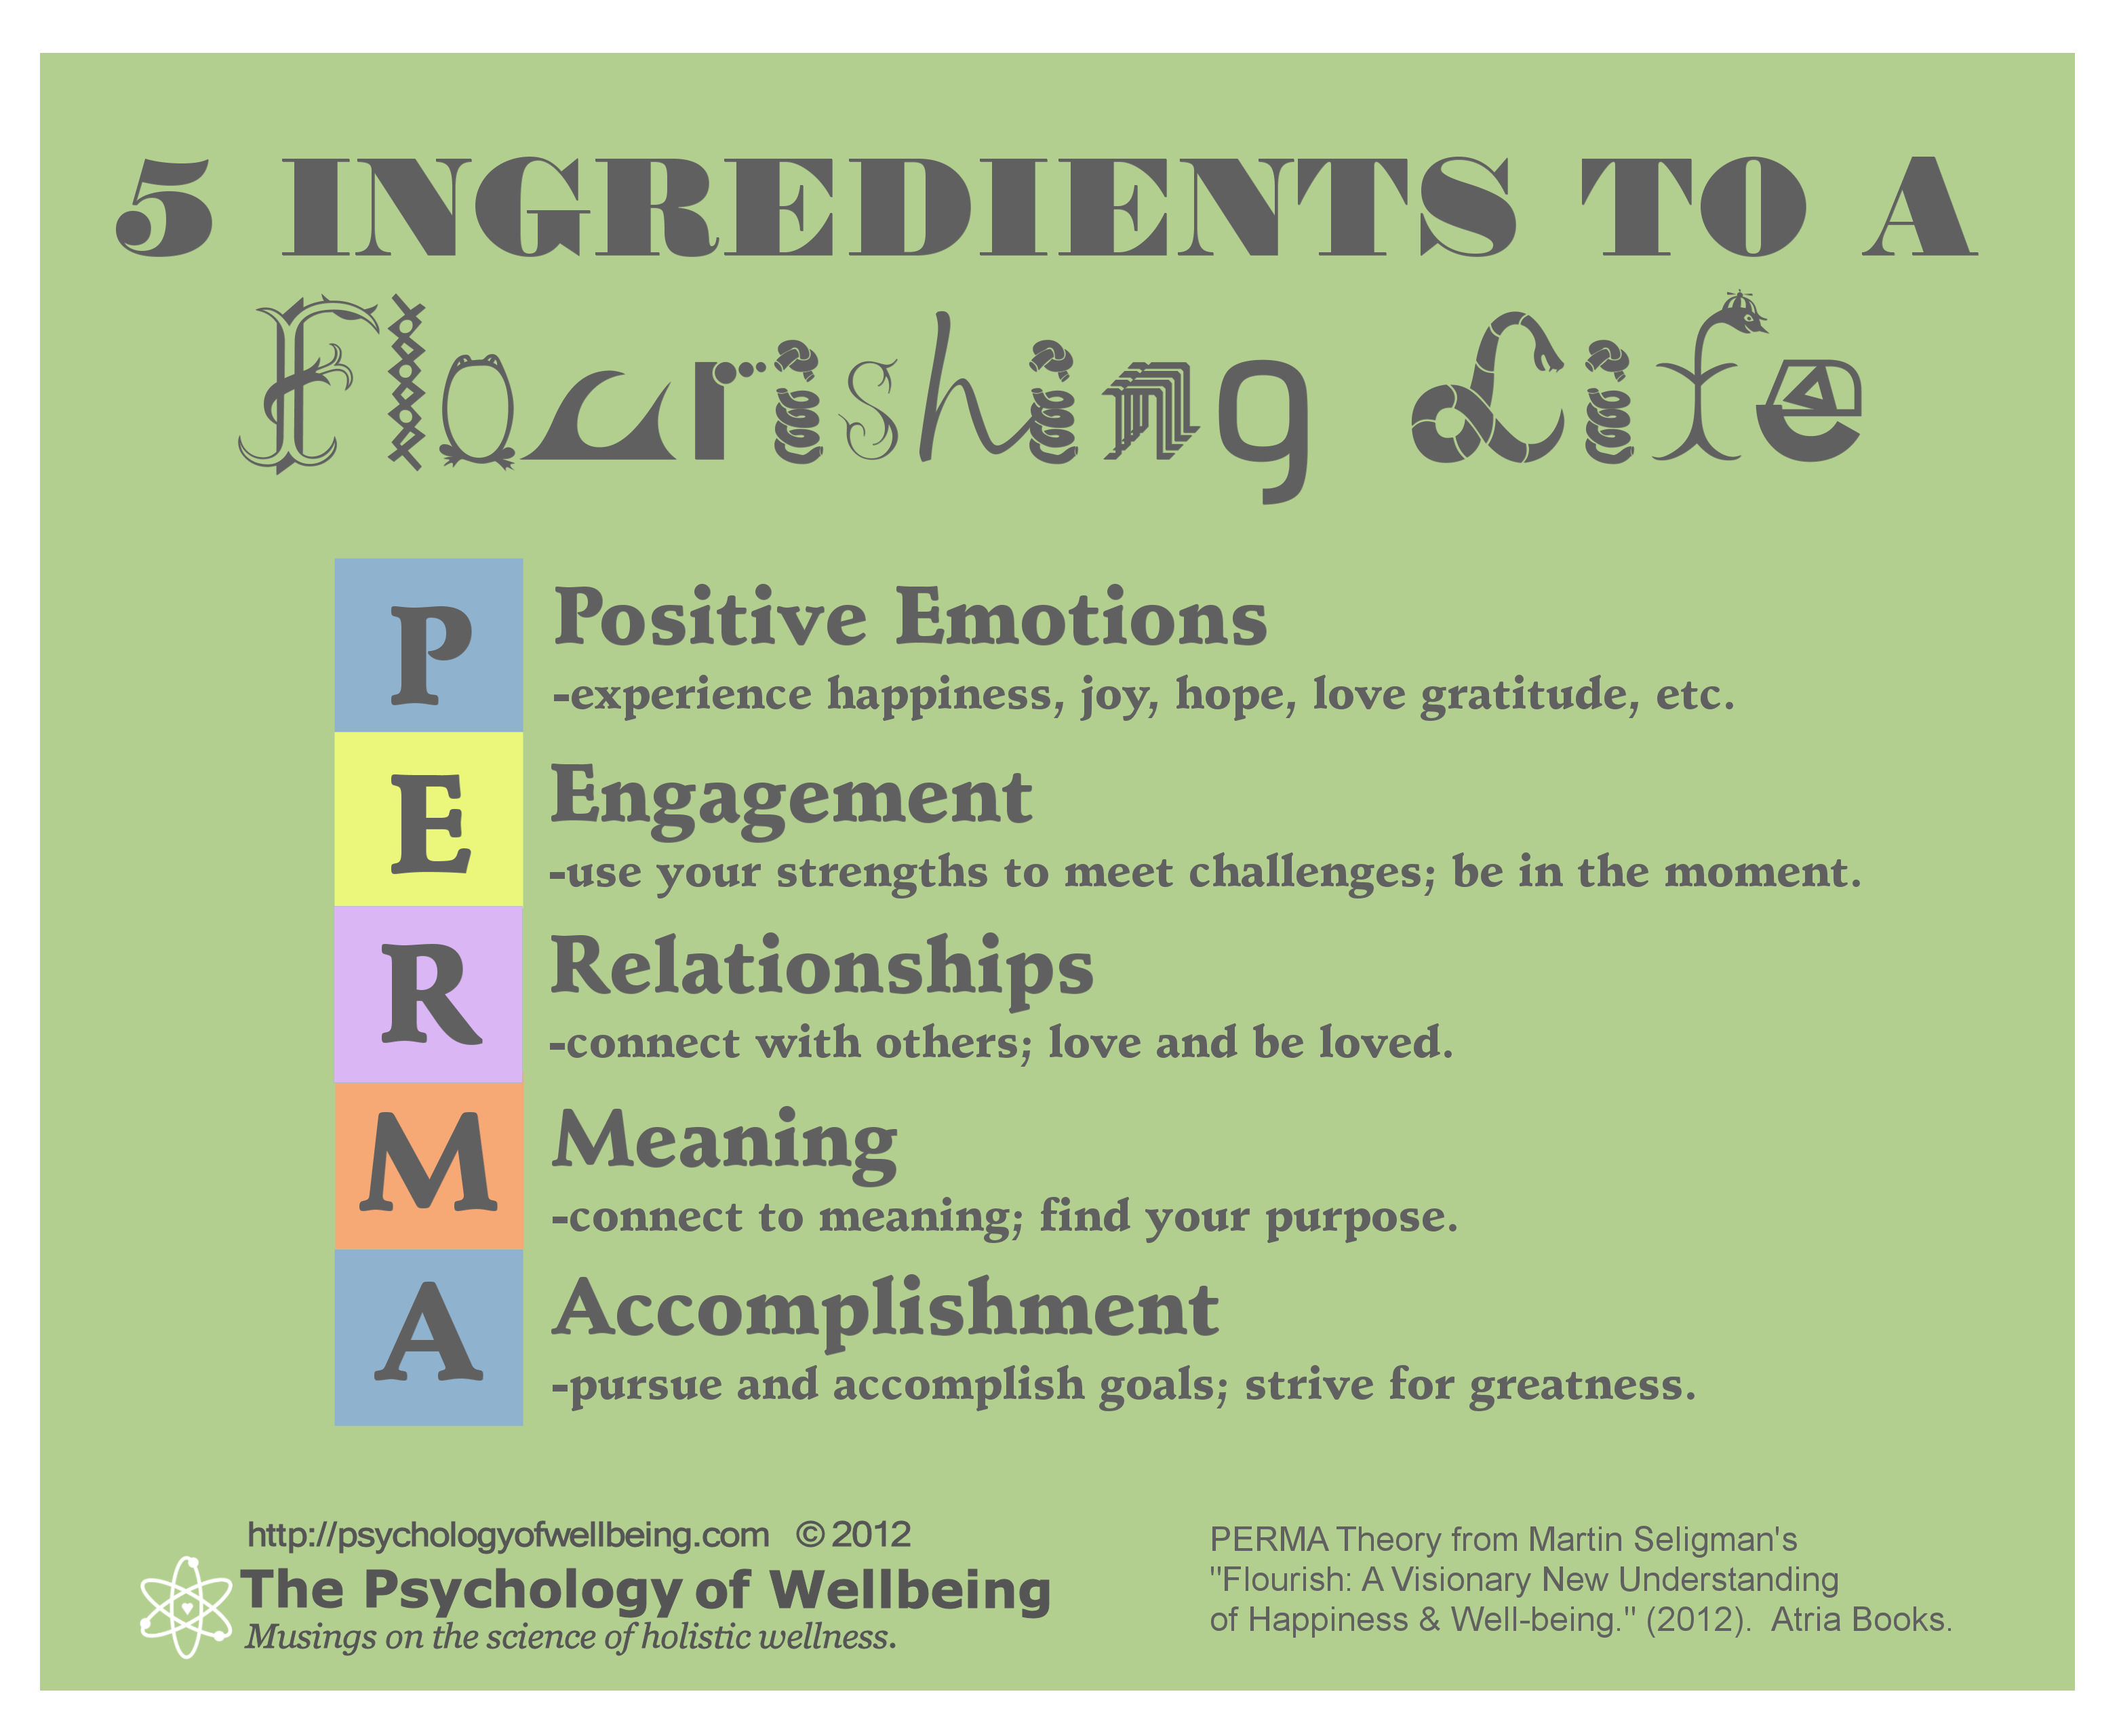 PERMA Model of Happiness (Examples + Images) - Practical Psychology